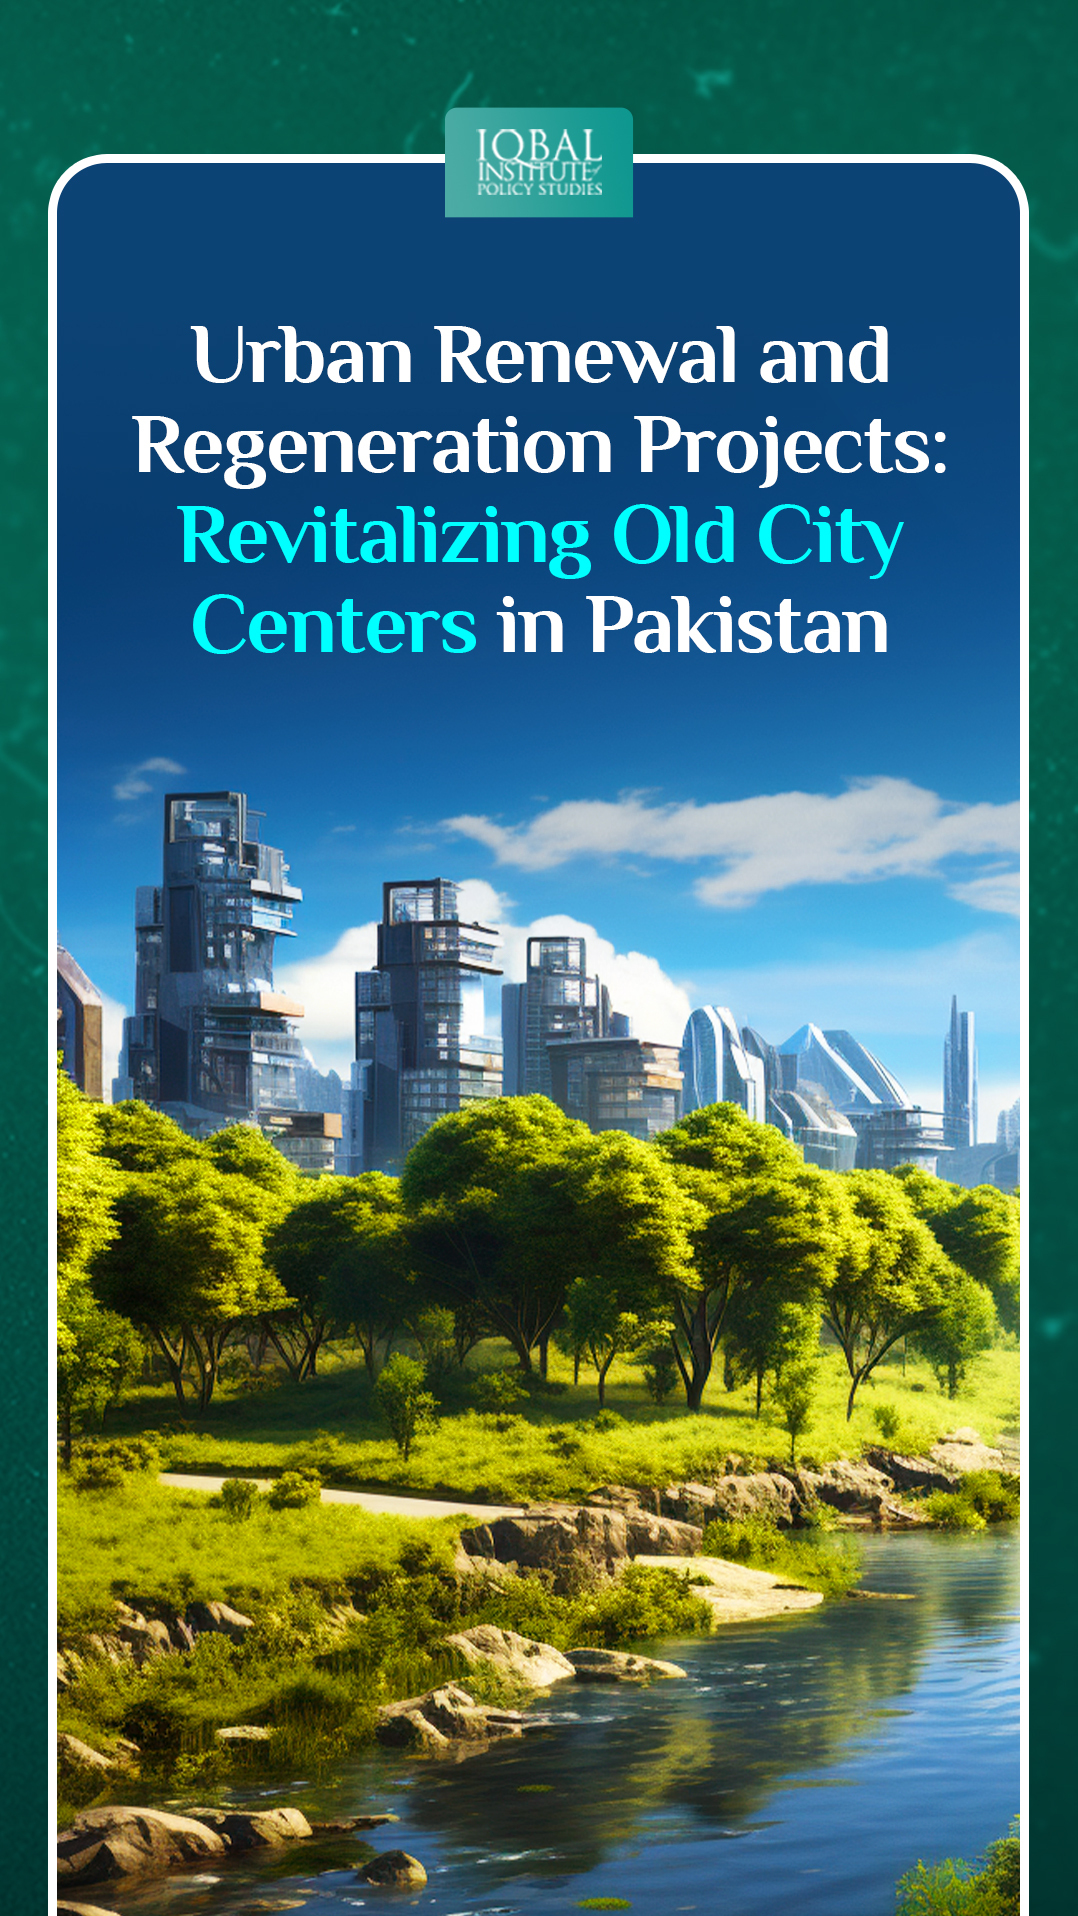 Urban Renewal and Regeneration Projects: Revitalizing Old City Centers in Pakistan